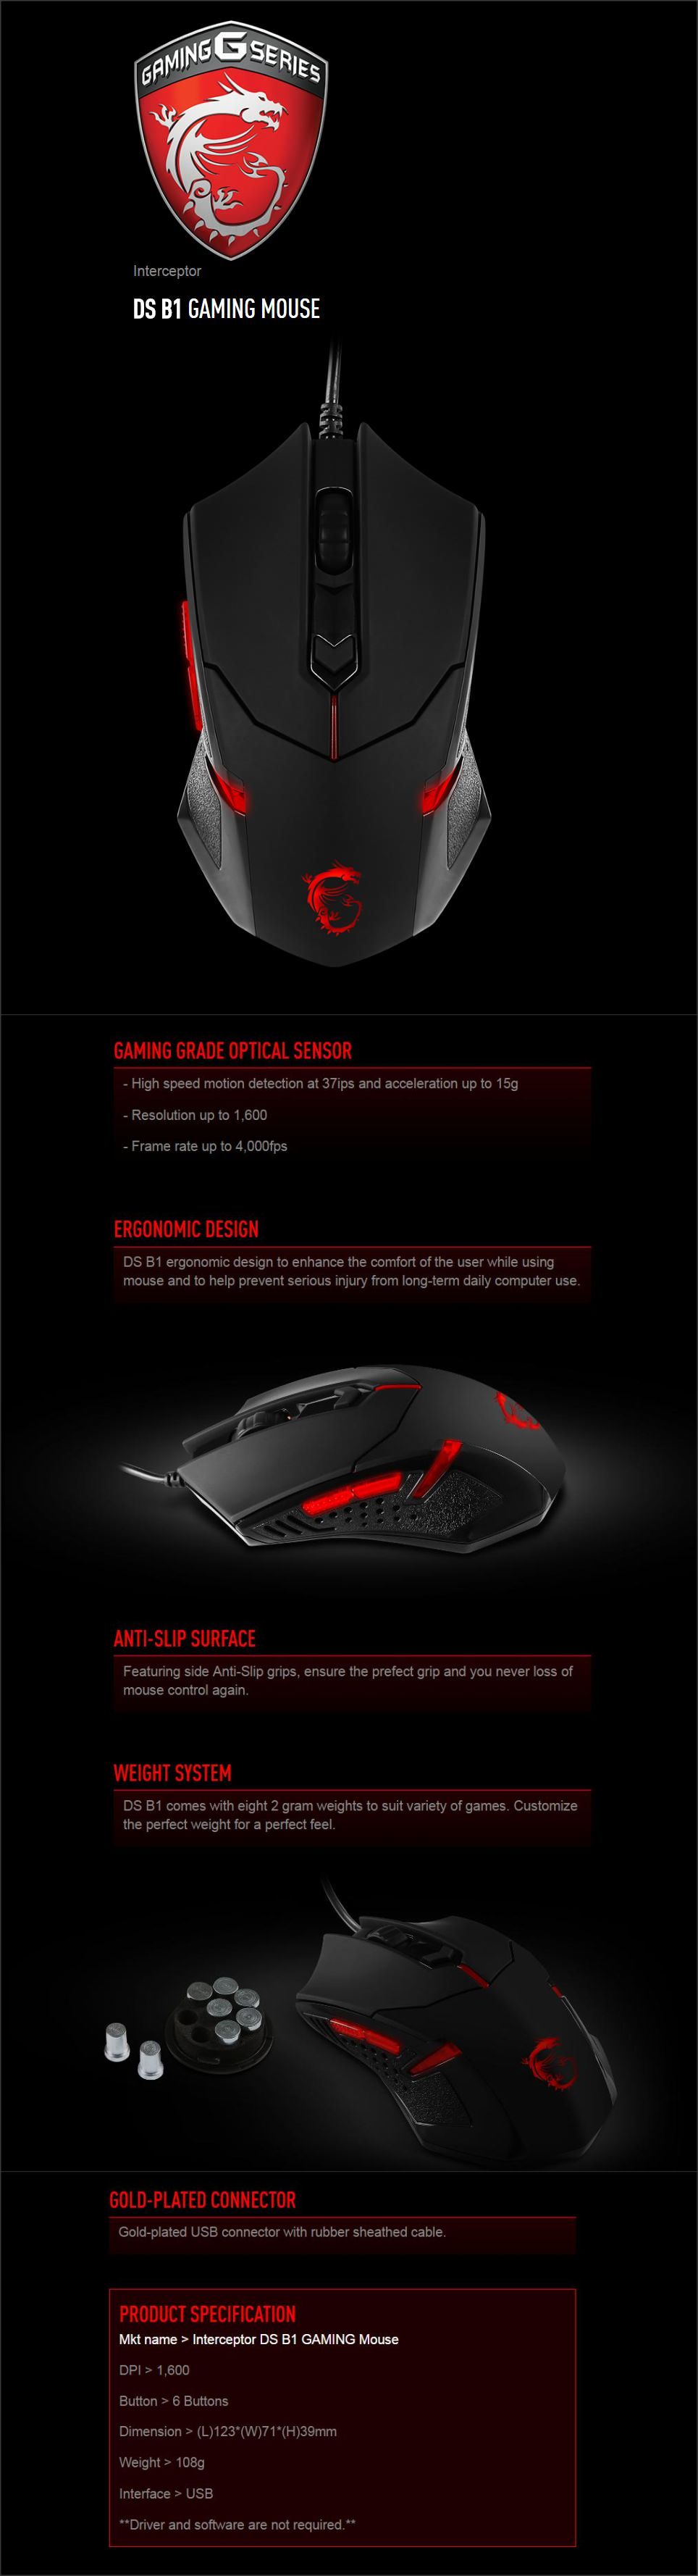 msi dsb1 gaming mouse